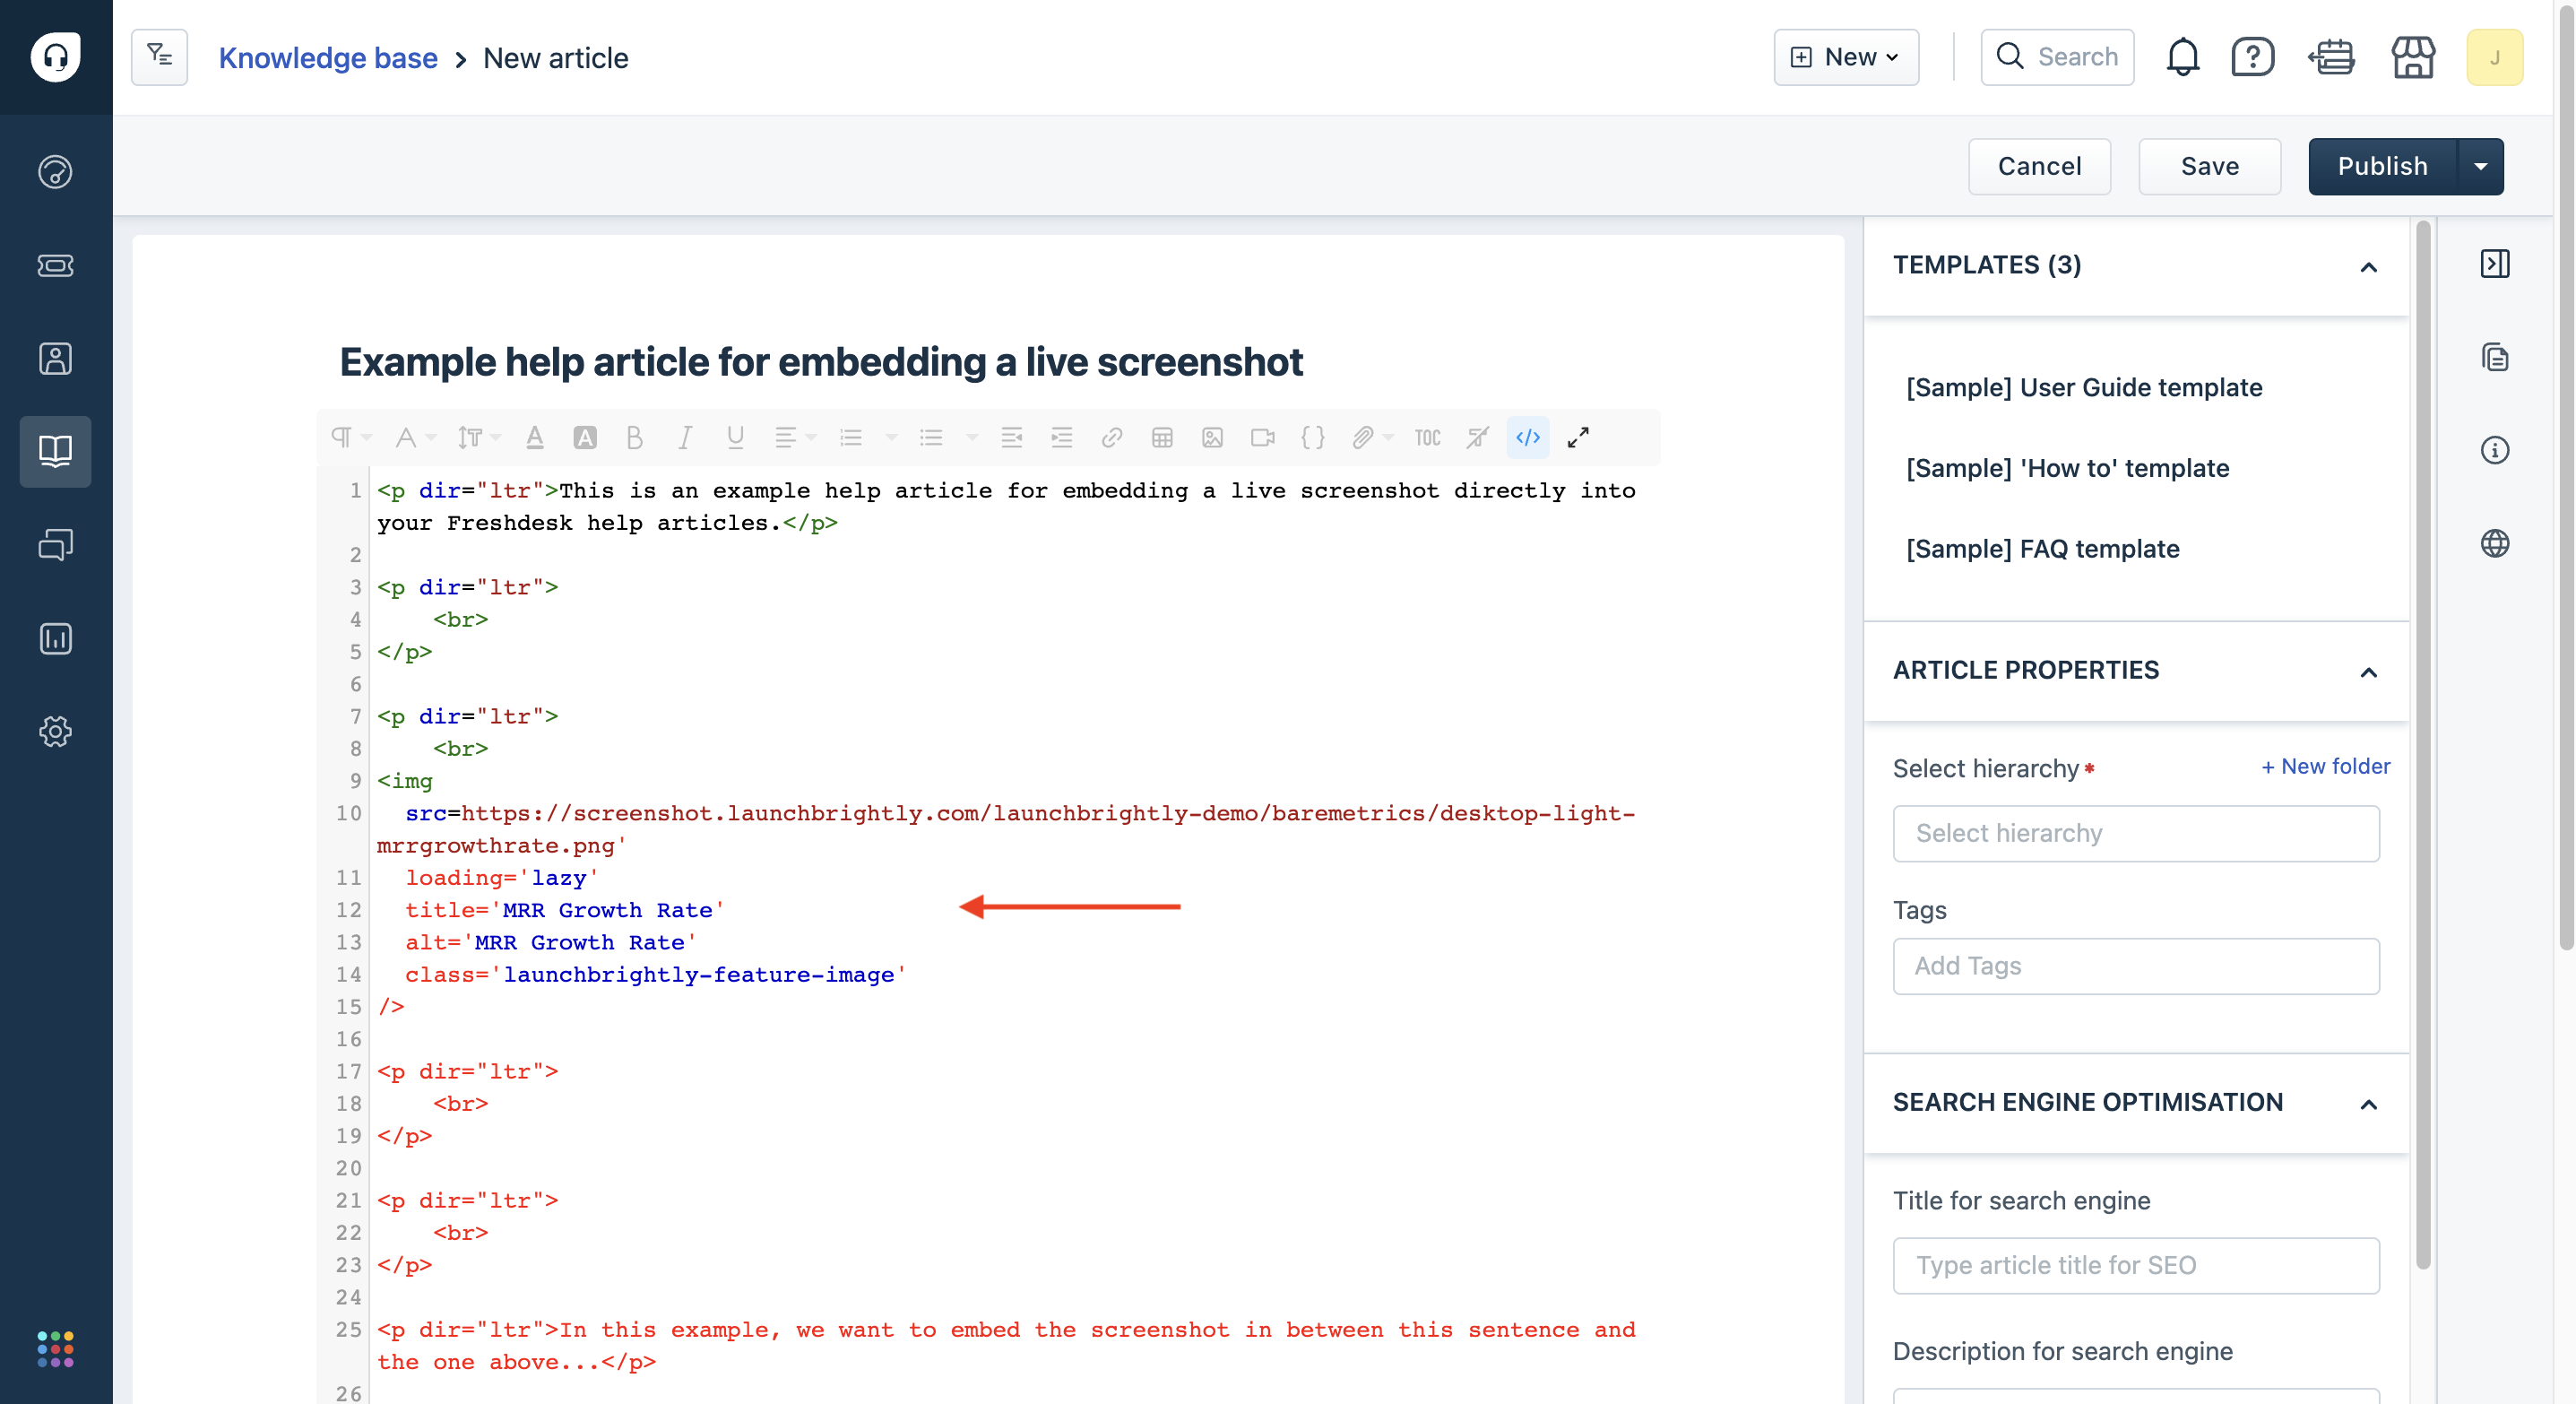 paste-embed-code-into-code-view-freshdesk.png